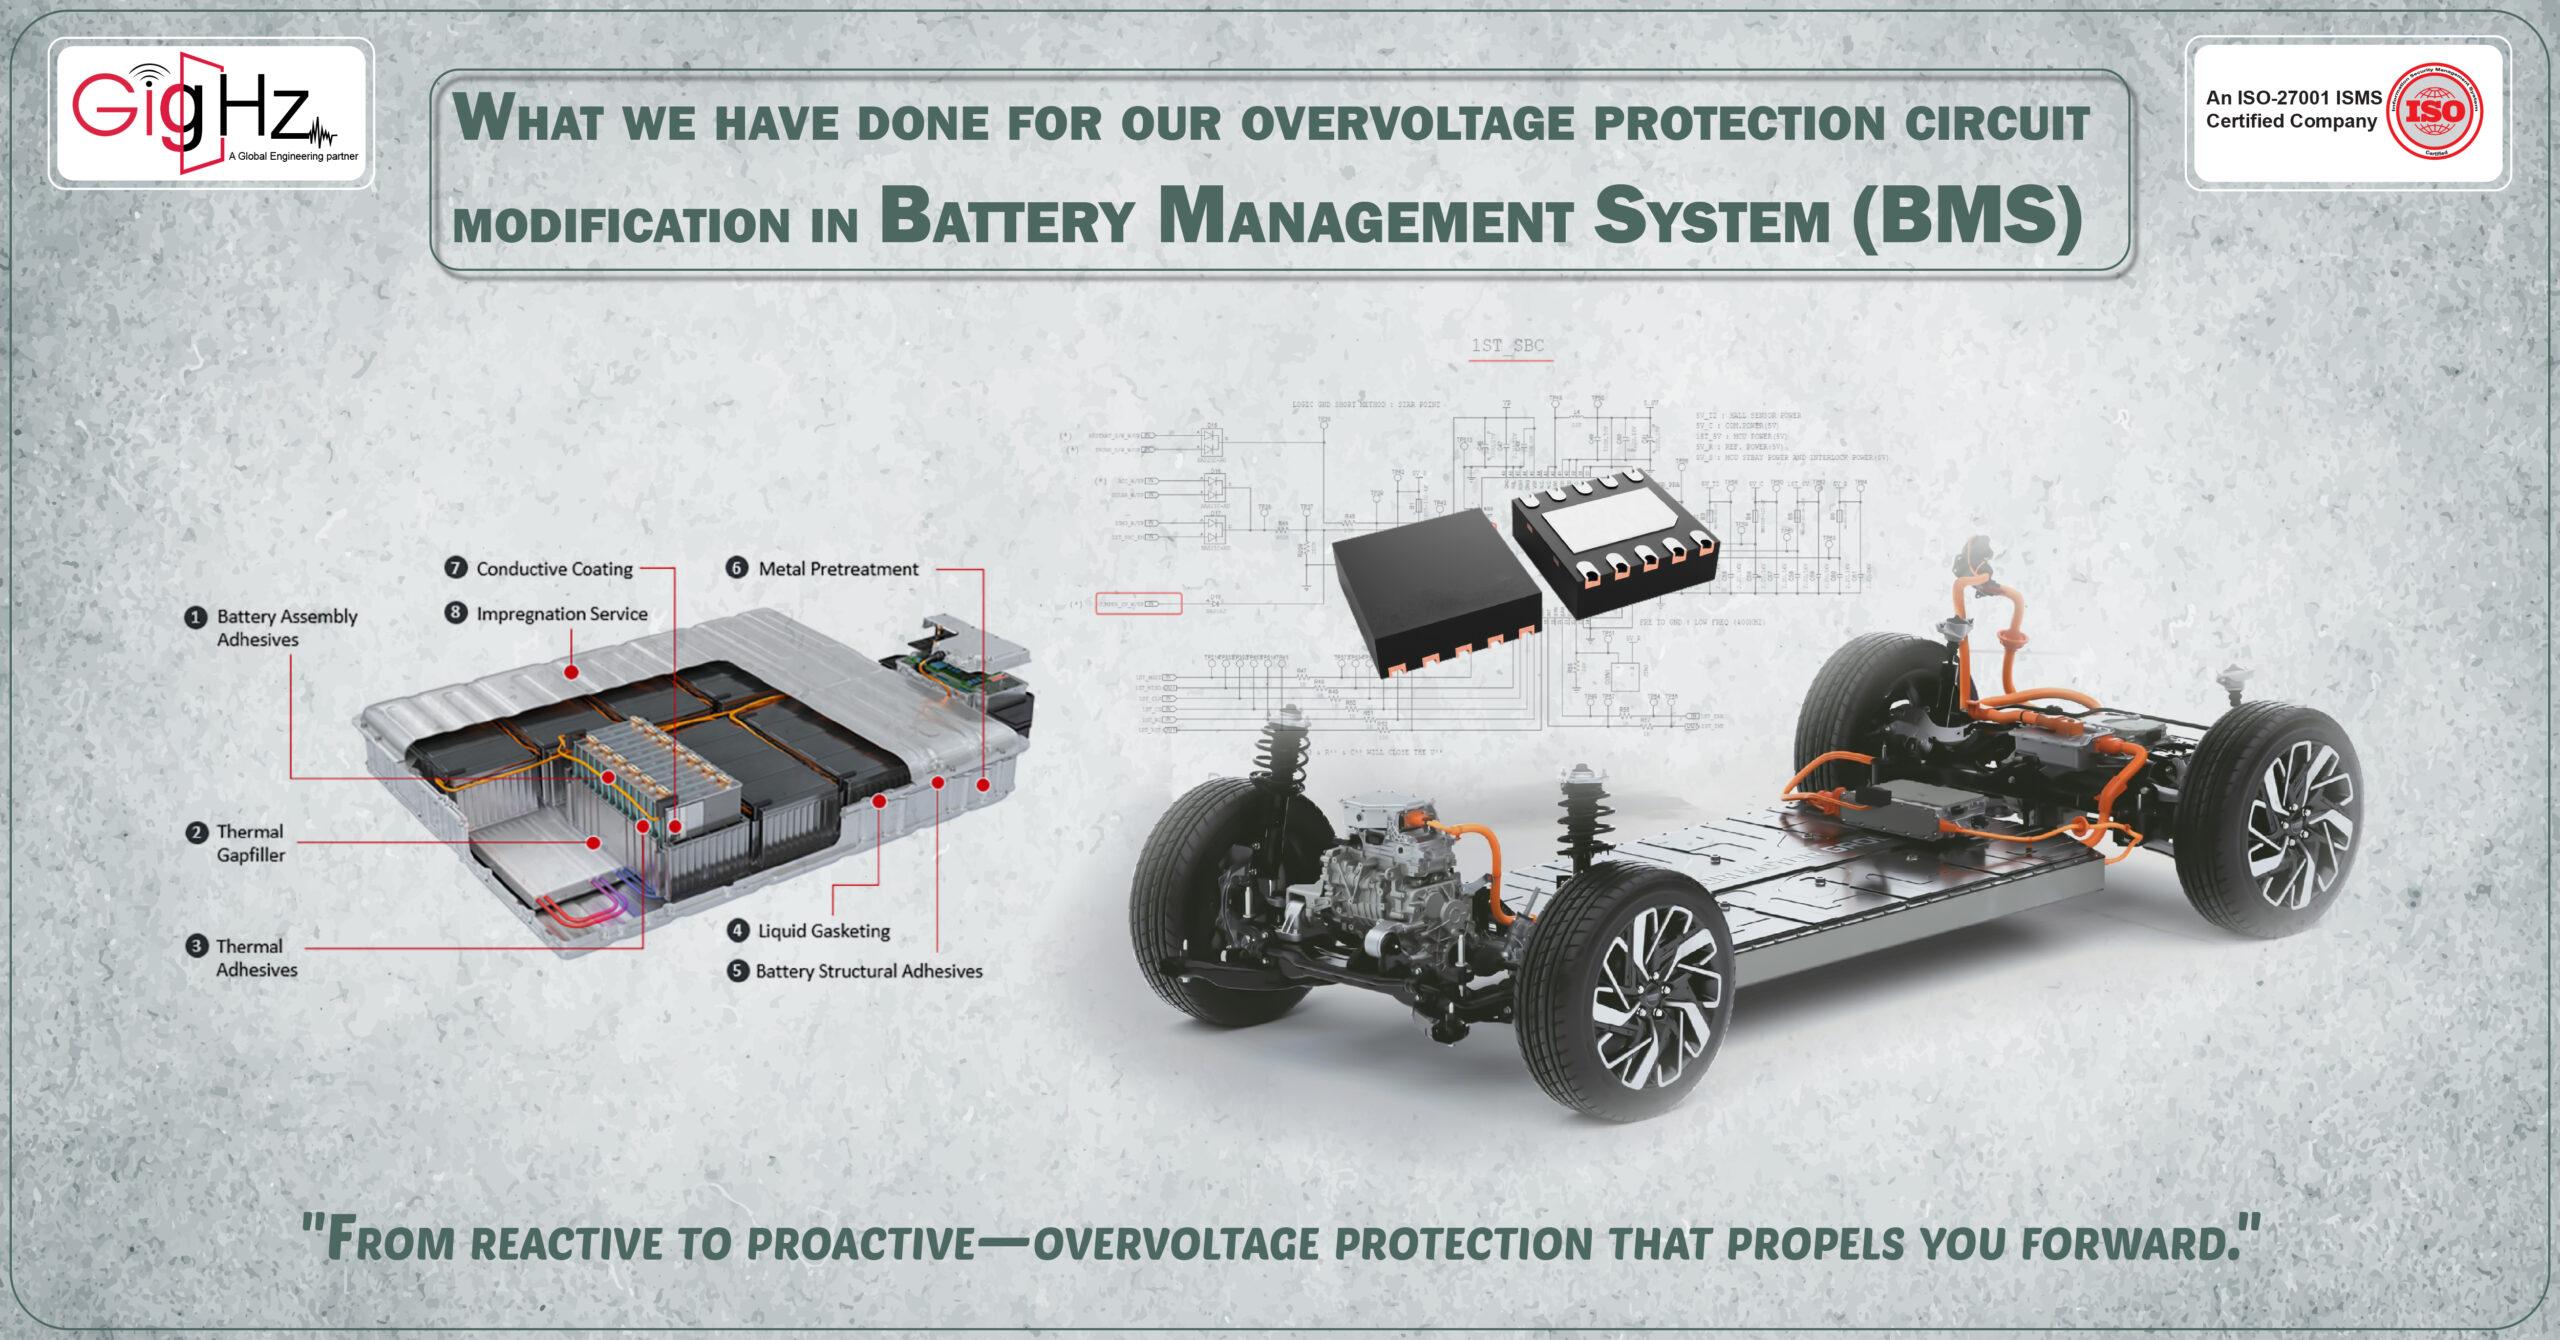 What we have done for Overvoltage Protection Circuit Modification in Battery Management System (BMS)?